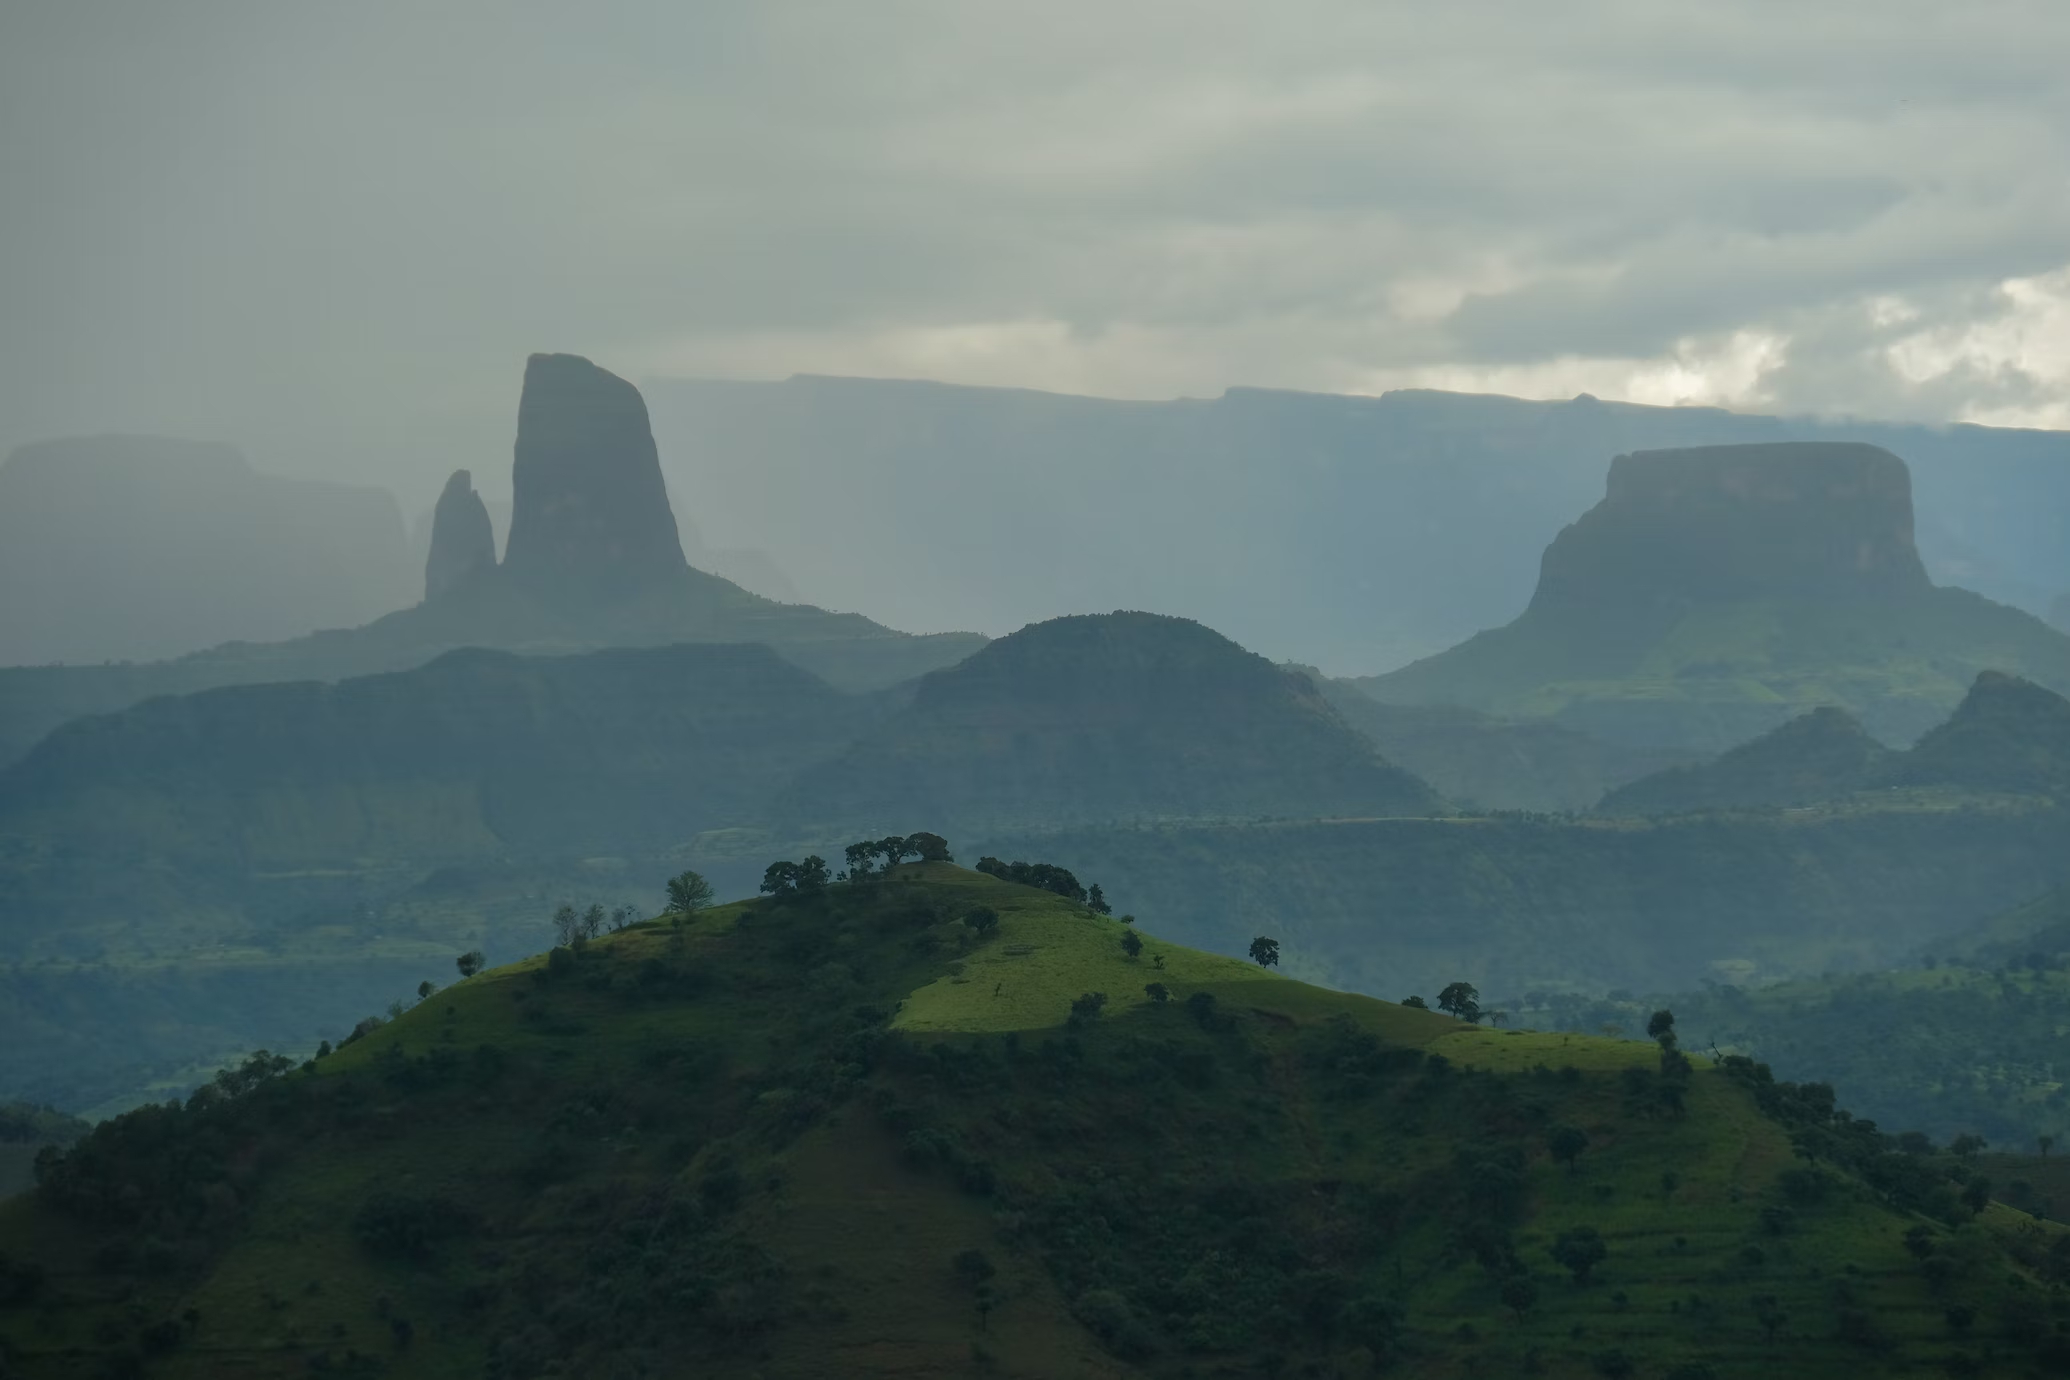 Ethiopian landscape, home to the abyssinian (crambe) plant